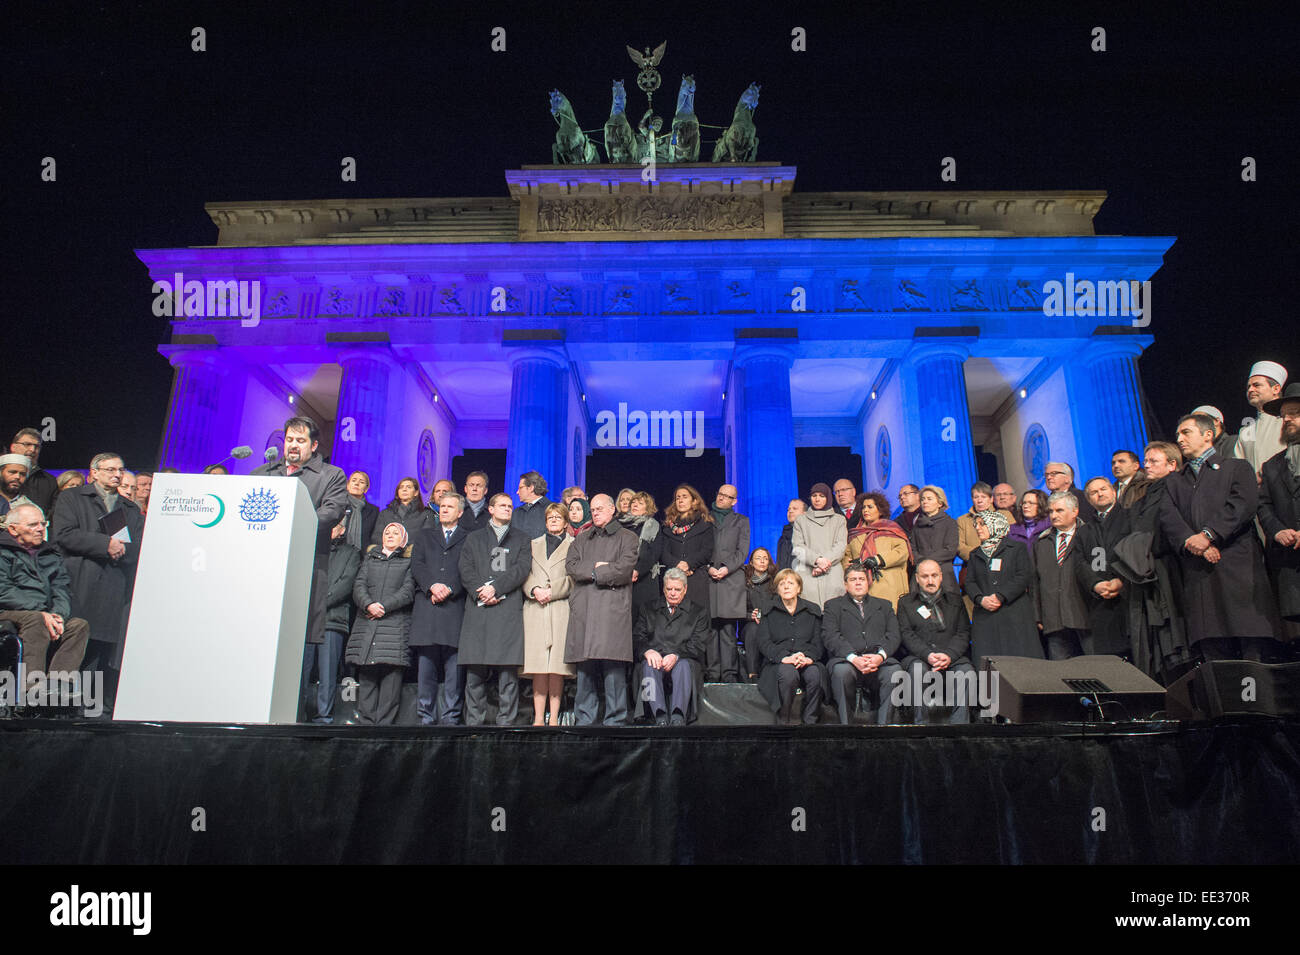 Berlin, Germany. 13th Jan, 2015. Chairman of the Central Committee of Muslims in Germany, Aiman Mazyek, speaks at a vigil for the victims of the attacks in France at the Brandenburg Gate in Berlin, Germany, 13 January 2015. The Central Committee of Muslims and the Turkish community have invoked the slogan 'Stand together - Show face' for the rally against Islamist terror and for the peaceful co-existence of the religions. Photo: MAURIZIO GAMBARINI/dpa/Alamy Live News Stock Photo